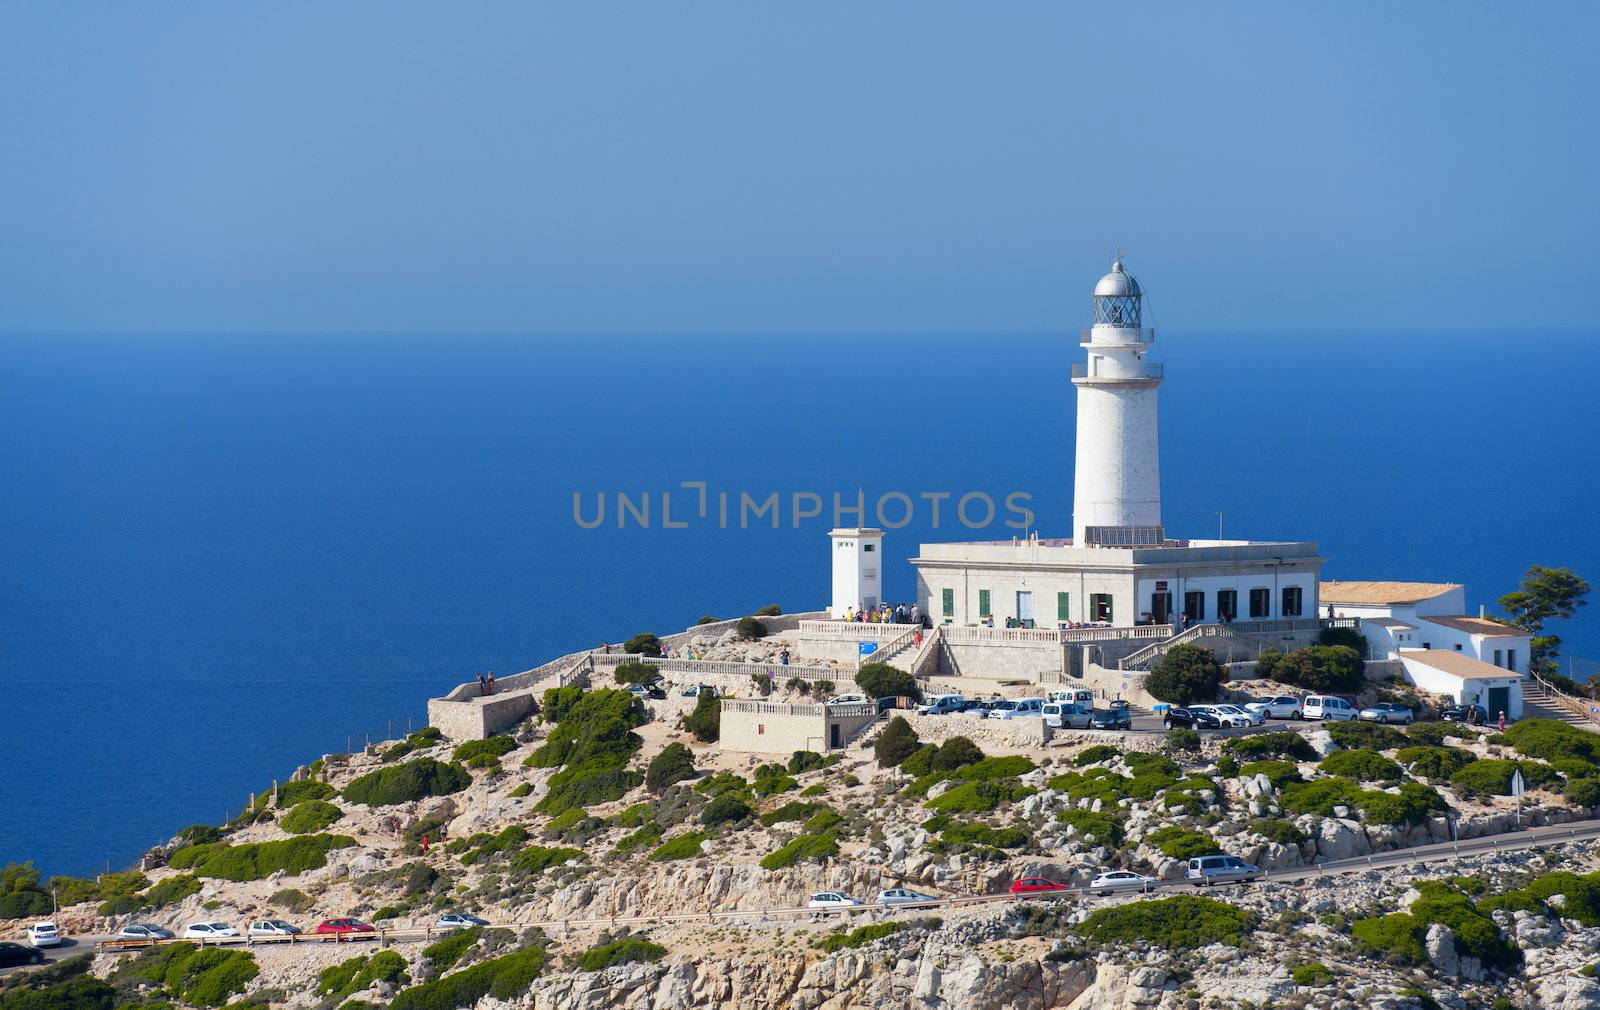 Lighthouse at Cape Formentor in the Coast of North Mallorca, Spain ( Balearic Islands )